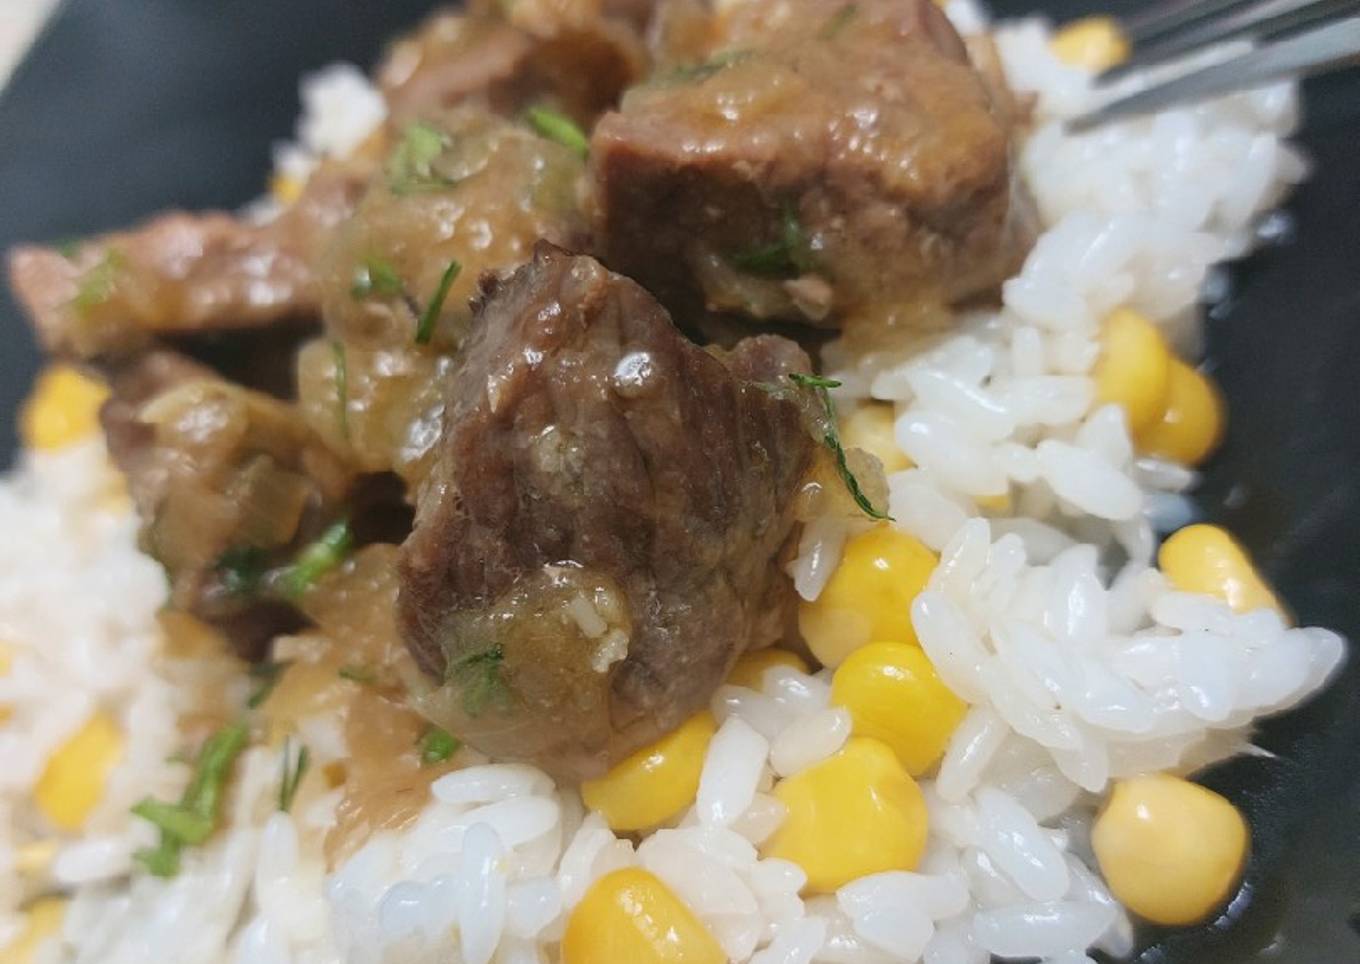 Steamed beef with delicious rice & corn garnish 🍛